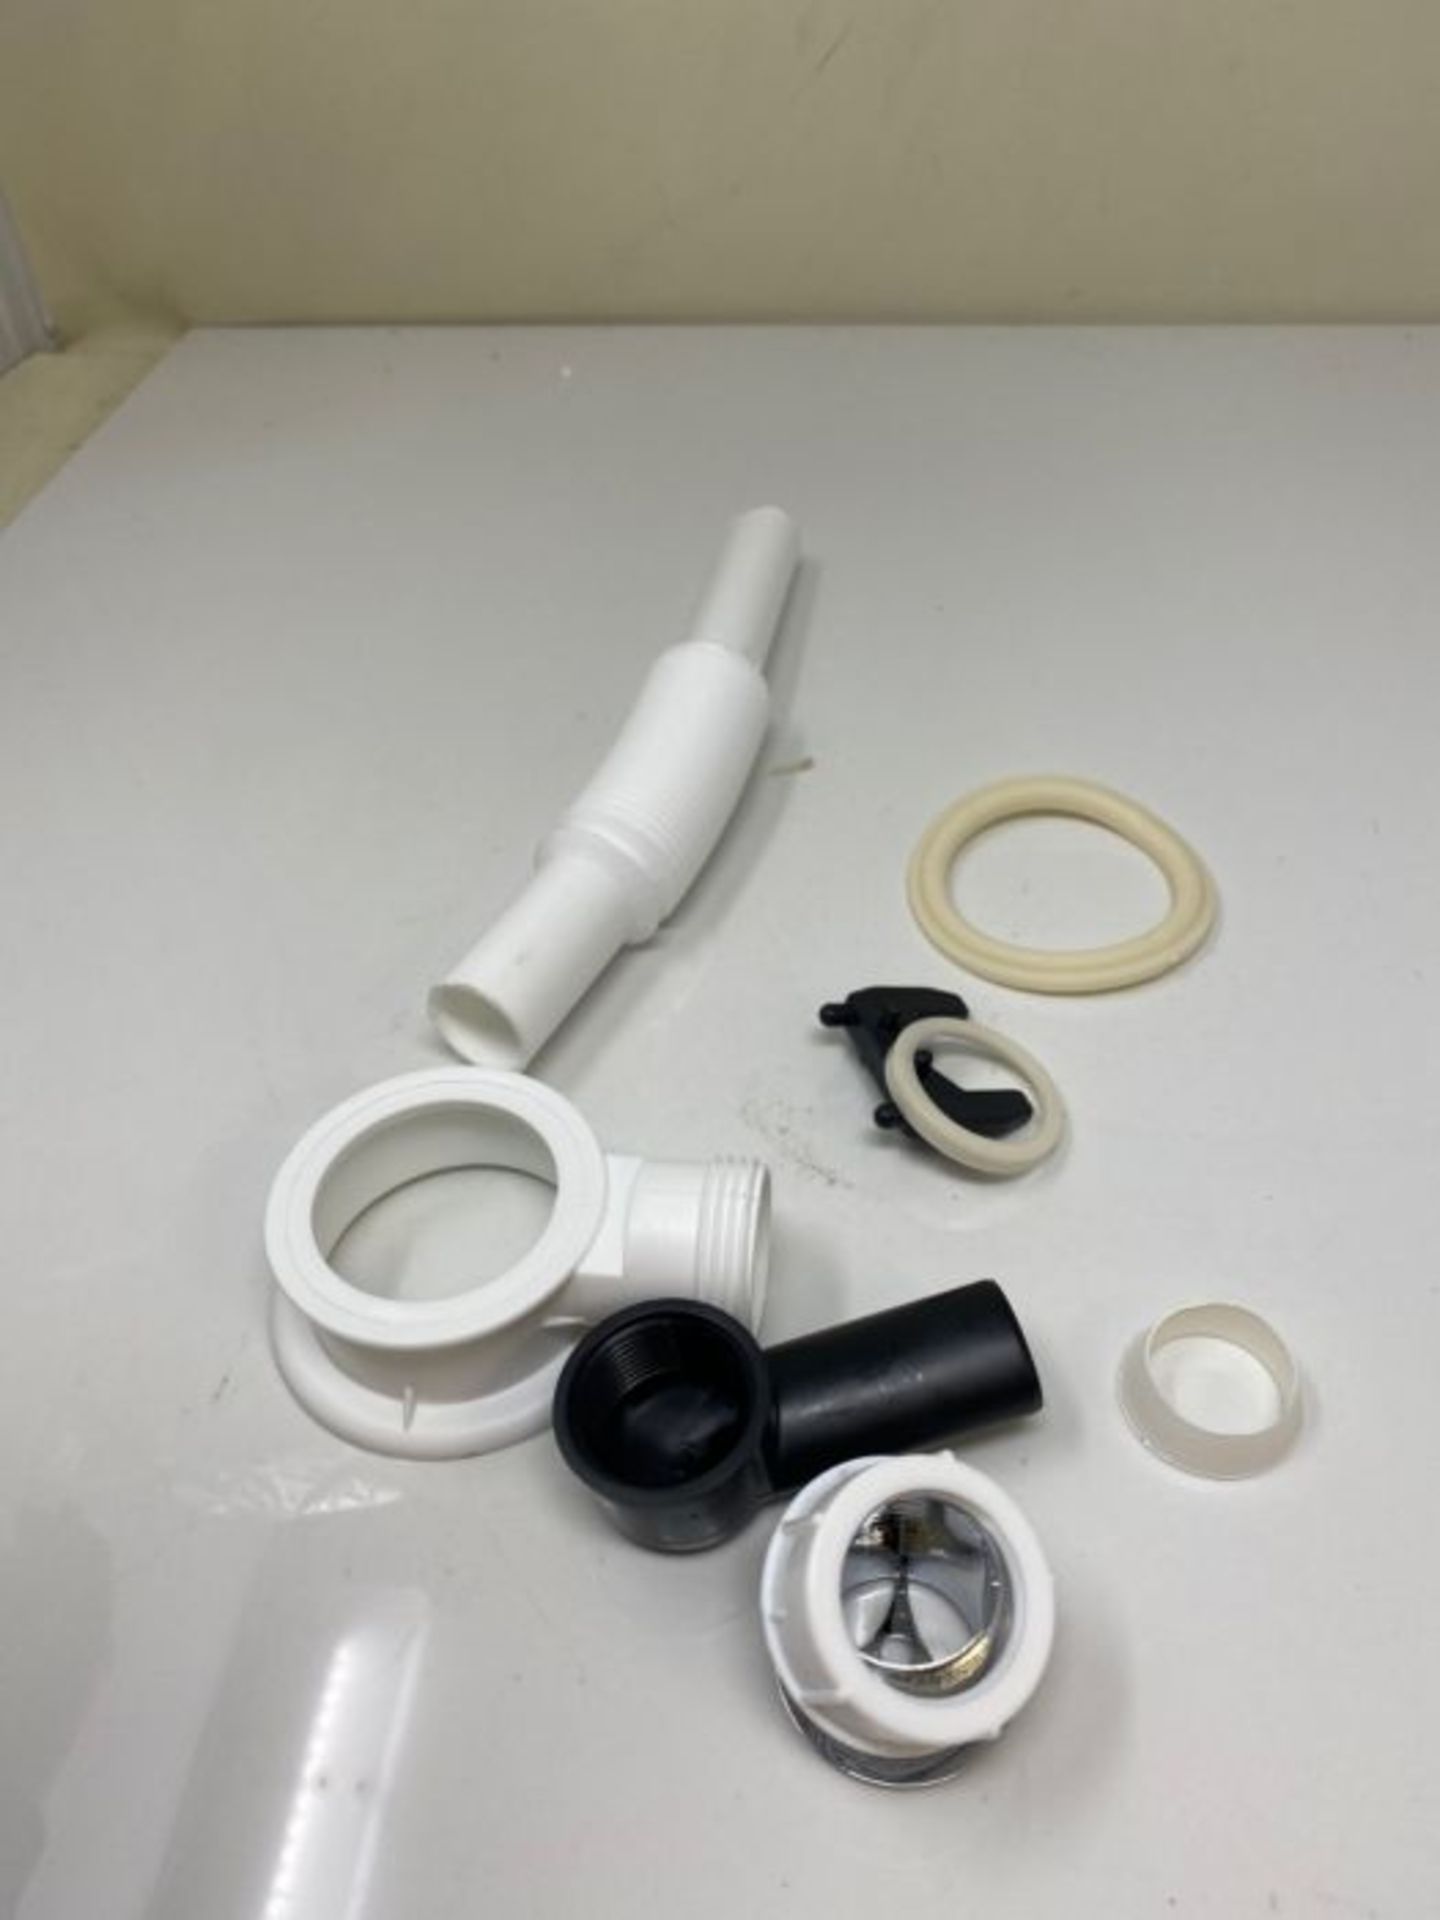 Wirquin SP2063399 Extendible Overflow Tube and Connection Pipe for Sink - Image 2 of 2